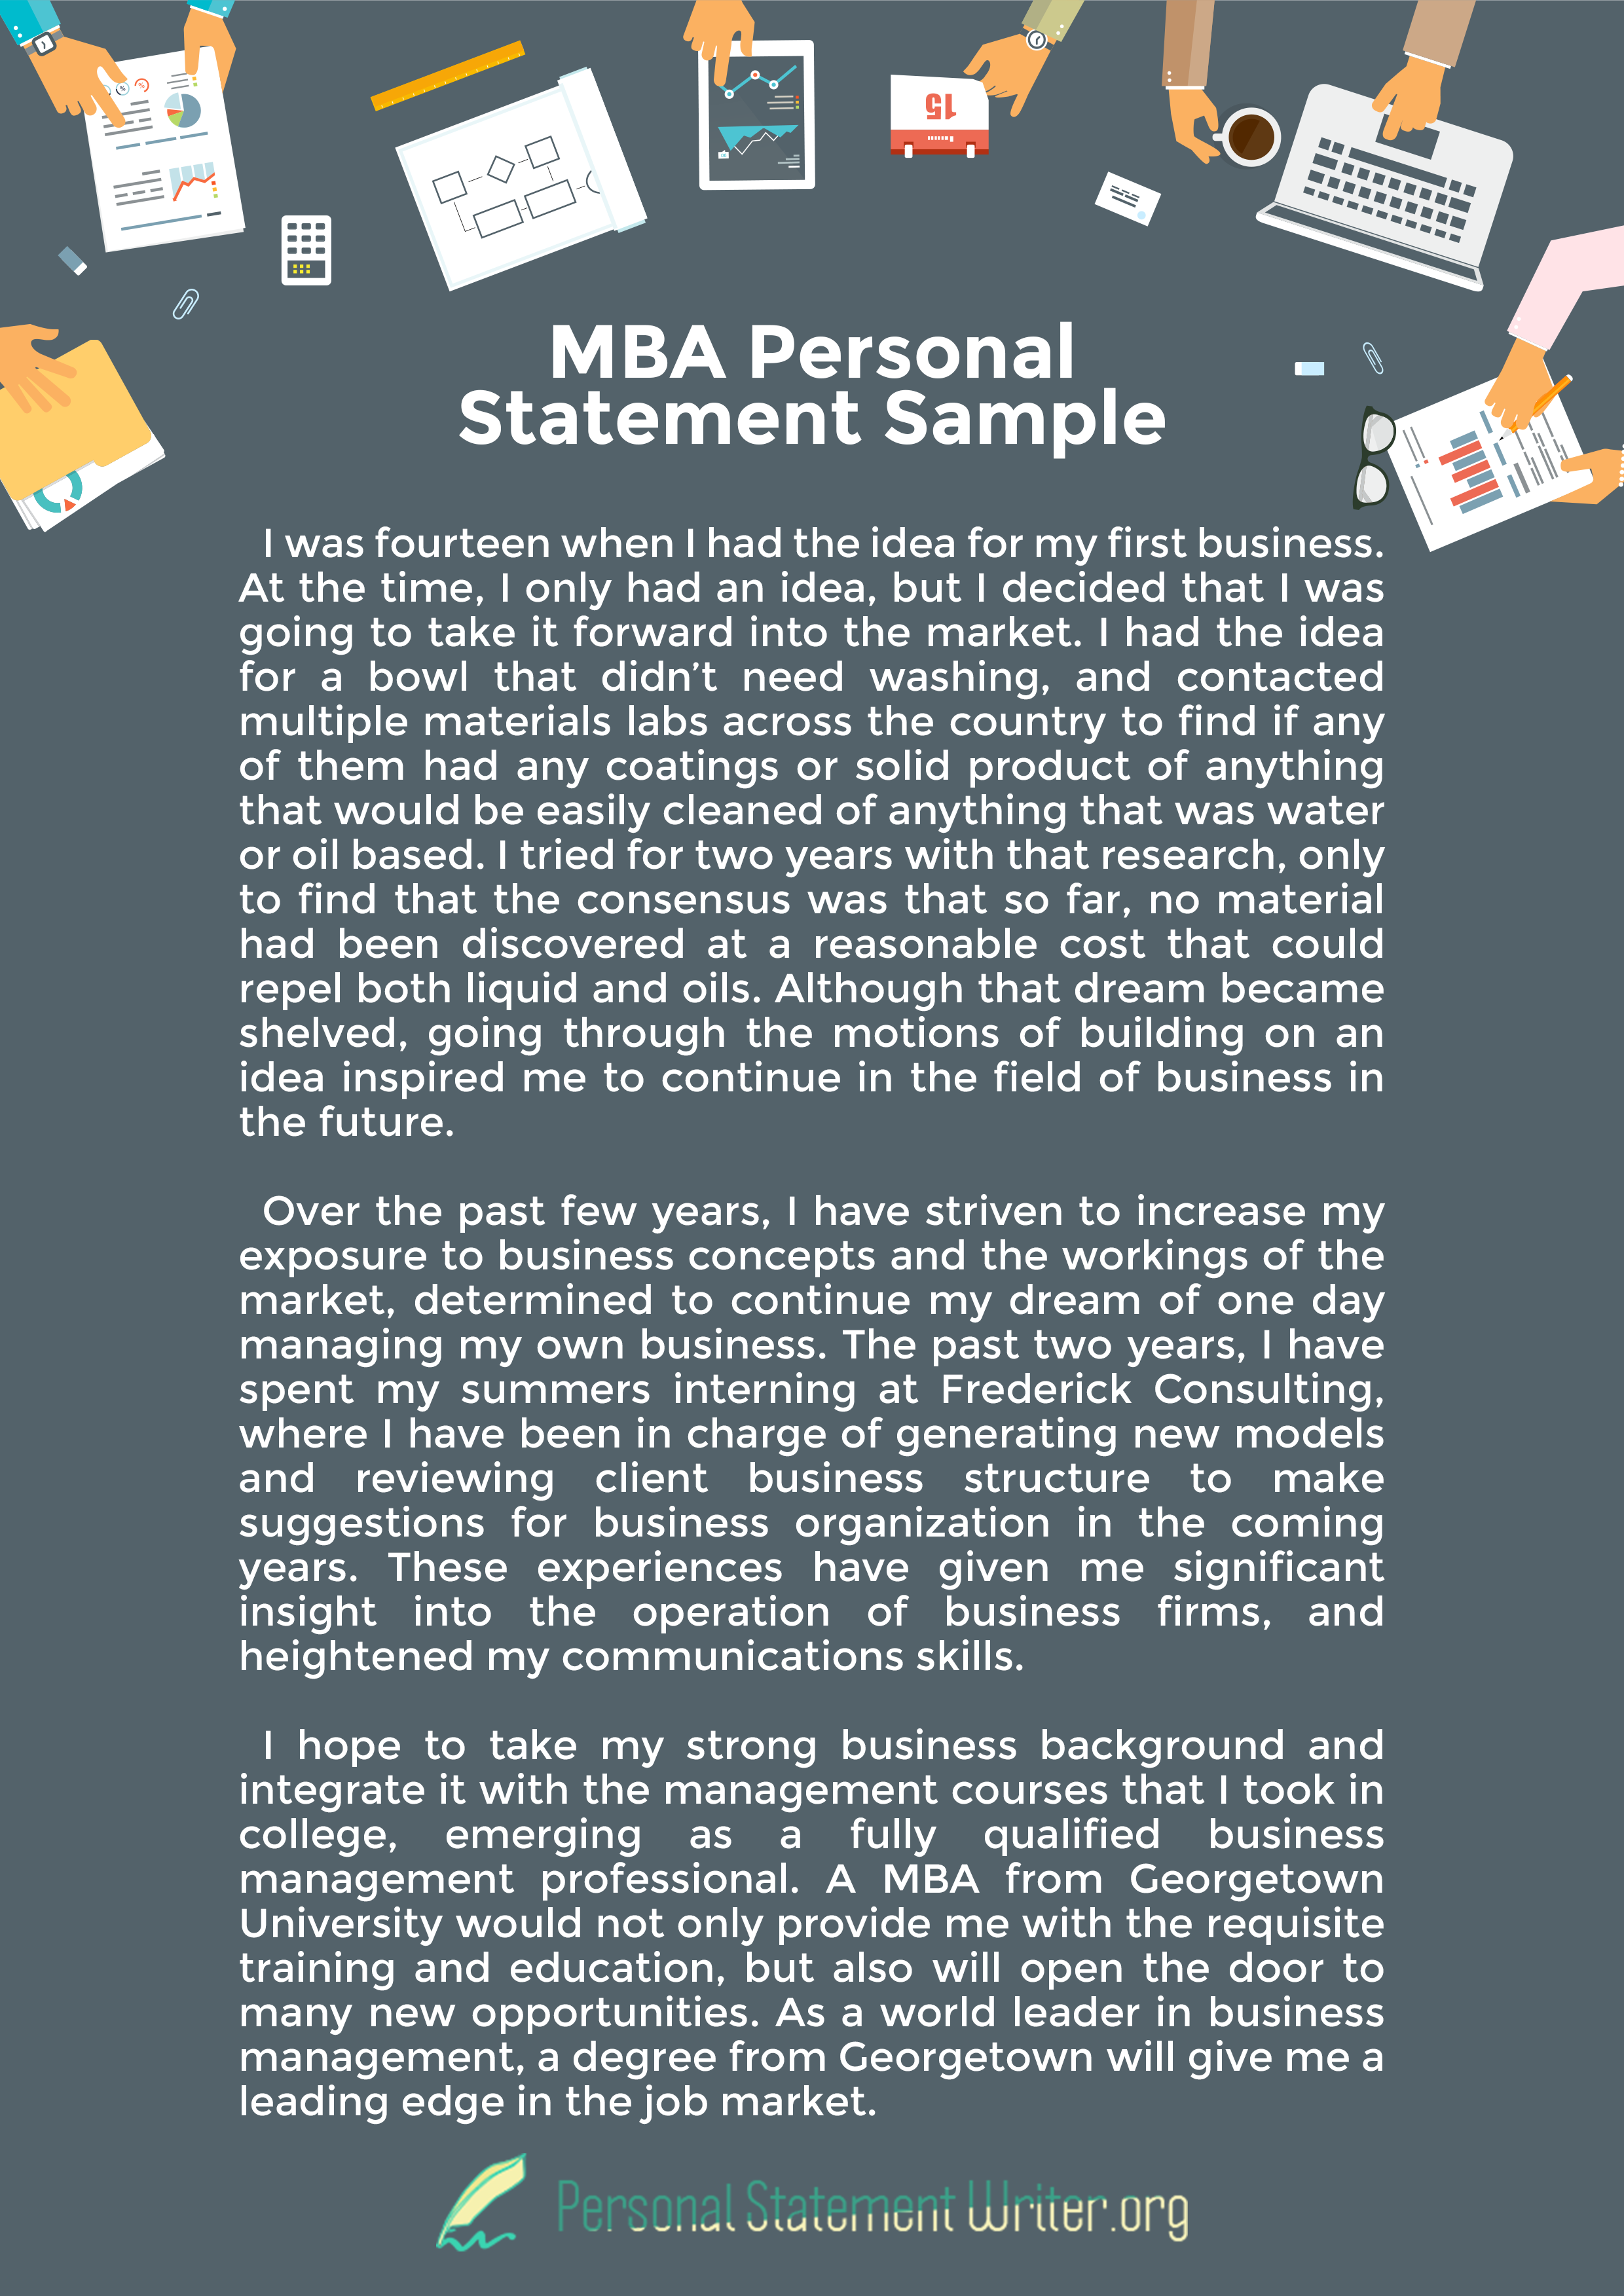 MBA Personal Statement Examples for Graduate Applicants